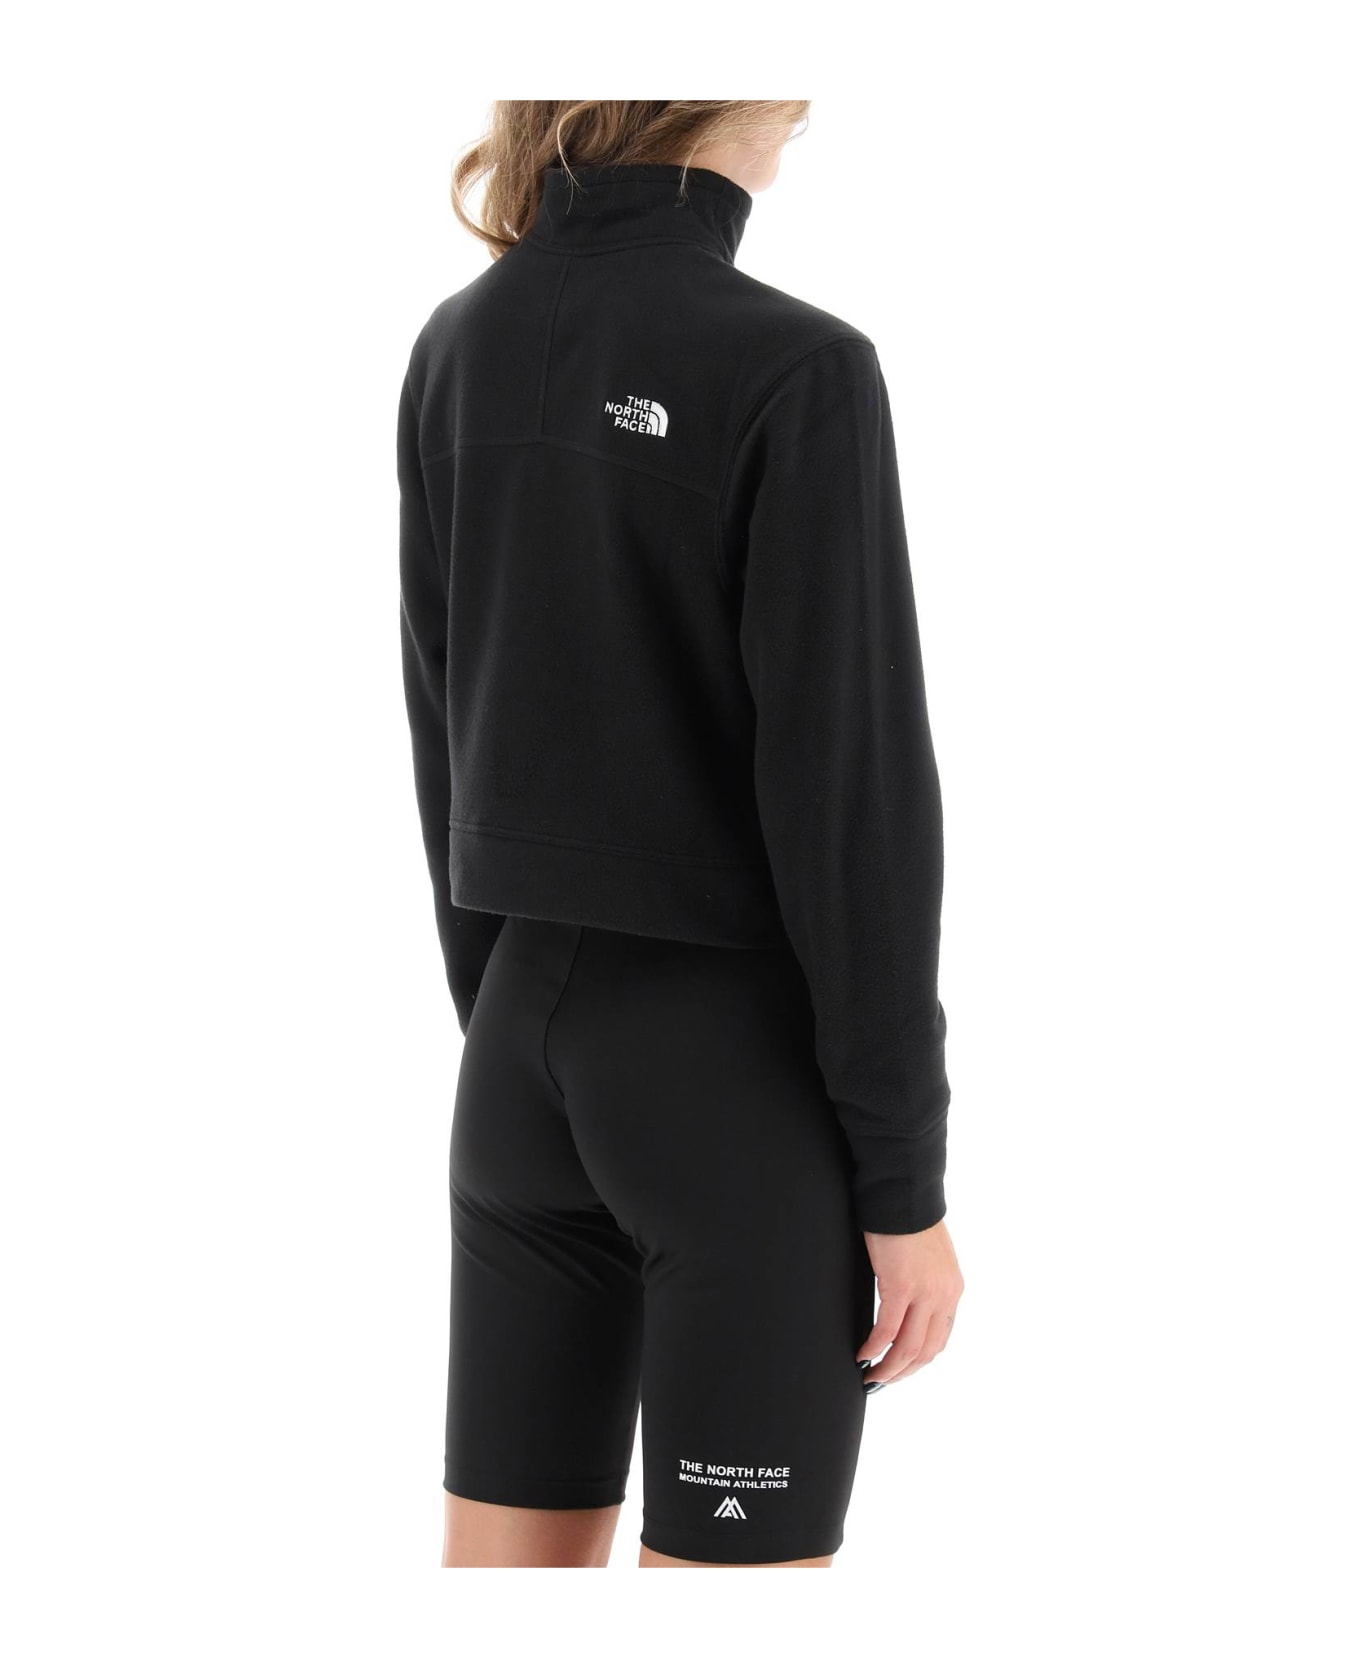 The North Face Glacer Cropped Fleece Sweatshirt - TNF BLACK (Black)